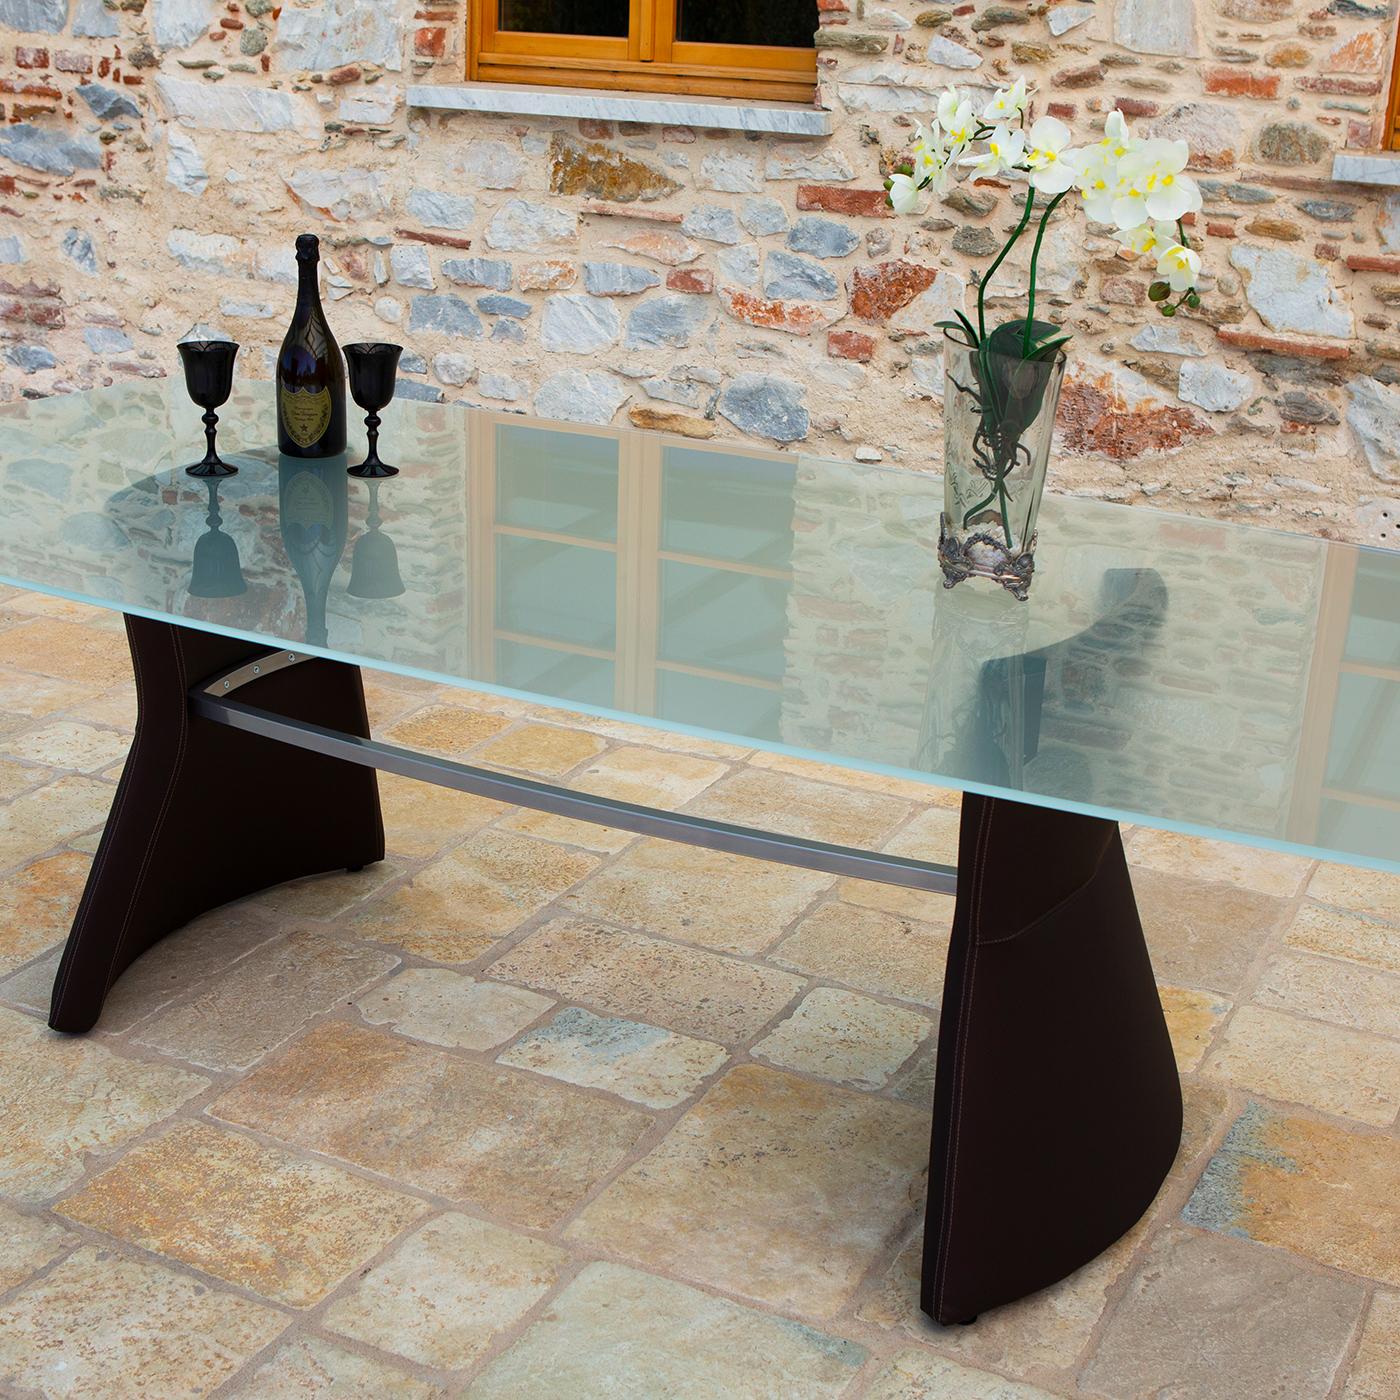 A dynamic interplay between lightness and strength, fragility and robustness, this modern dining table boasts a rectangular top with beveled edges. Made of glass, the top is sustained by a steel structure and two slanted, thick legs. This exquisite